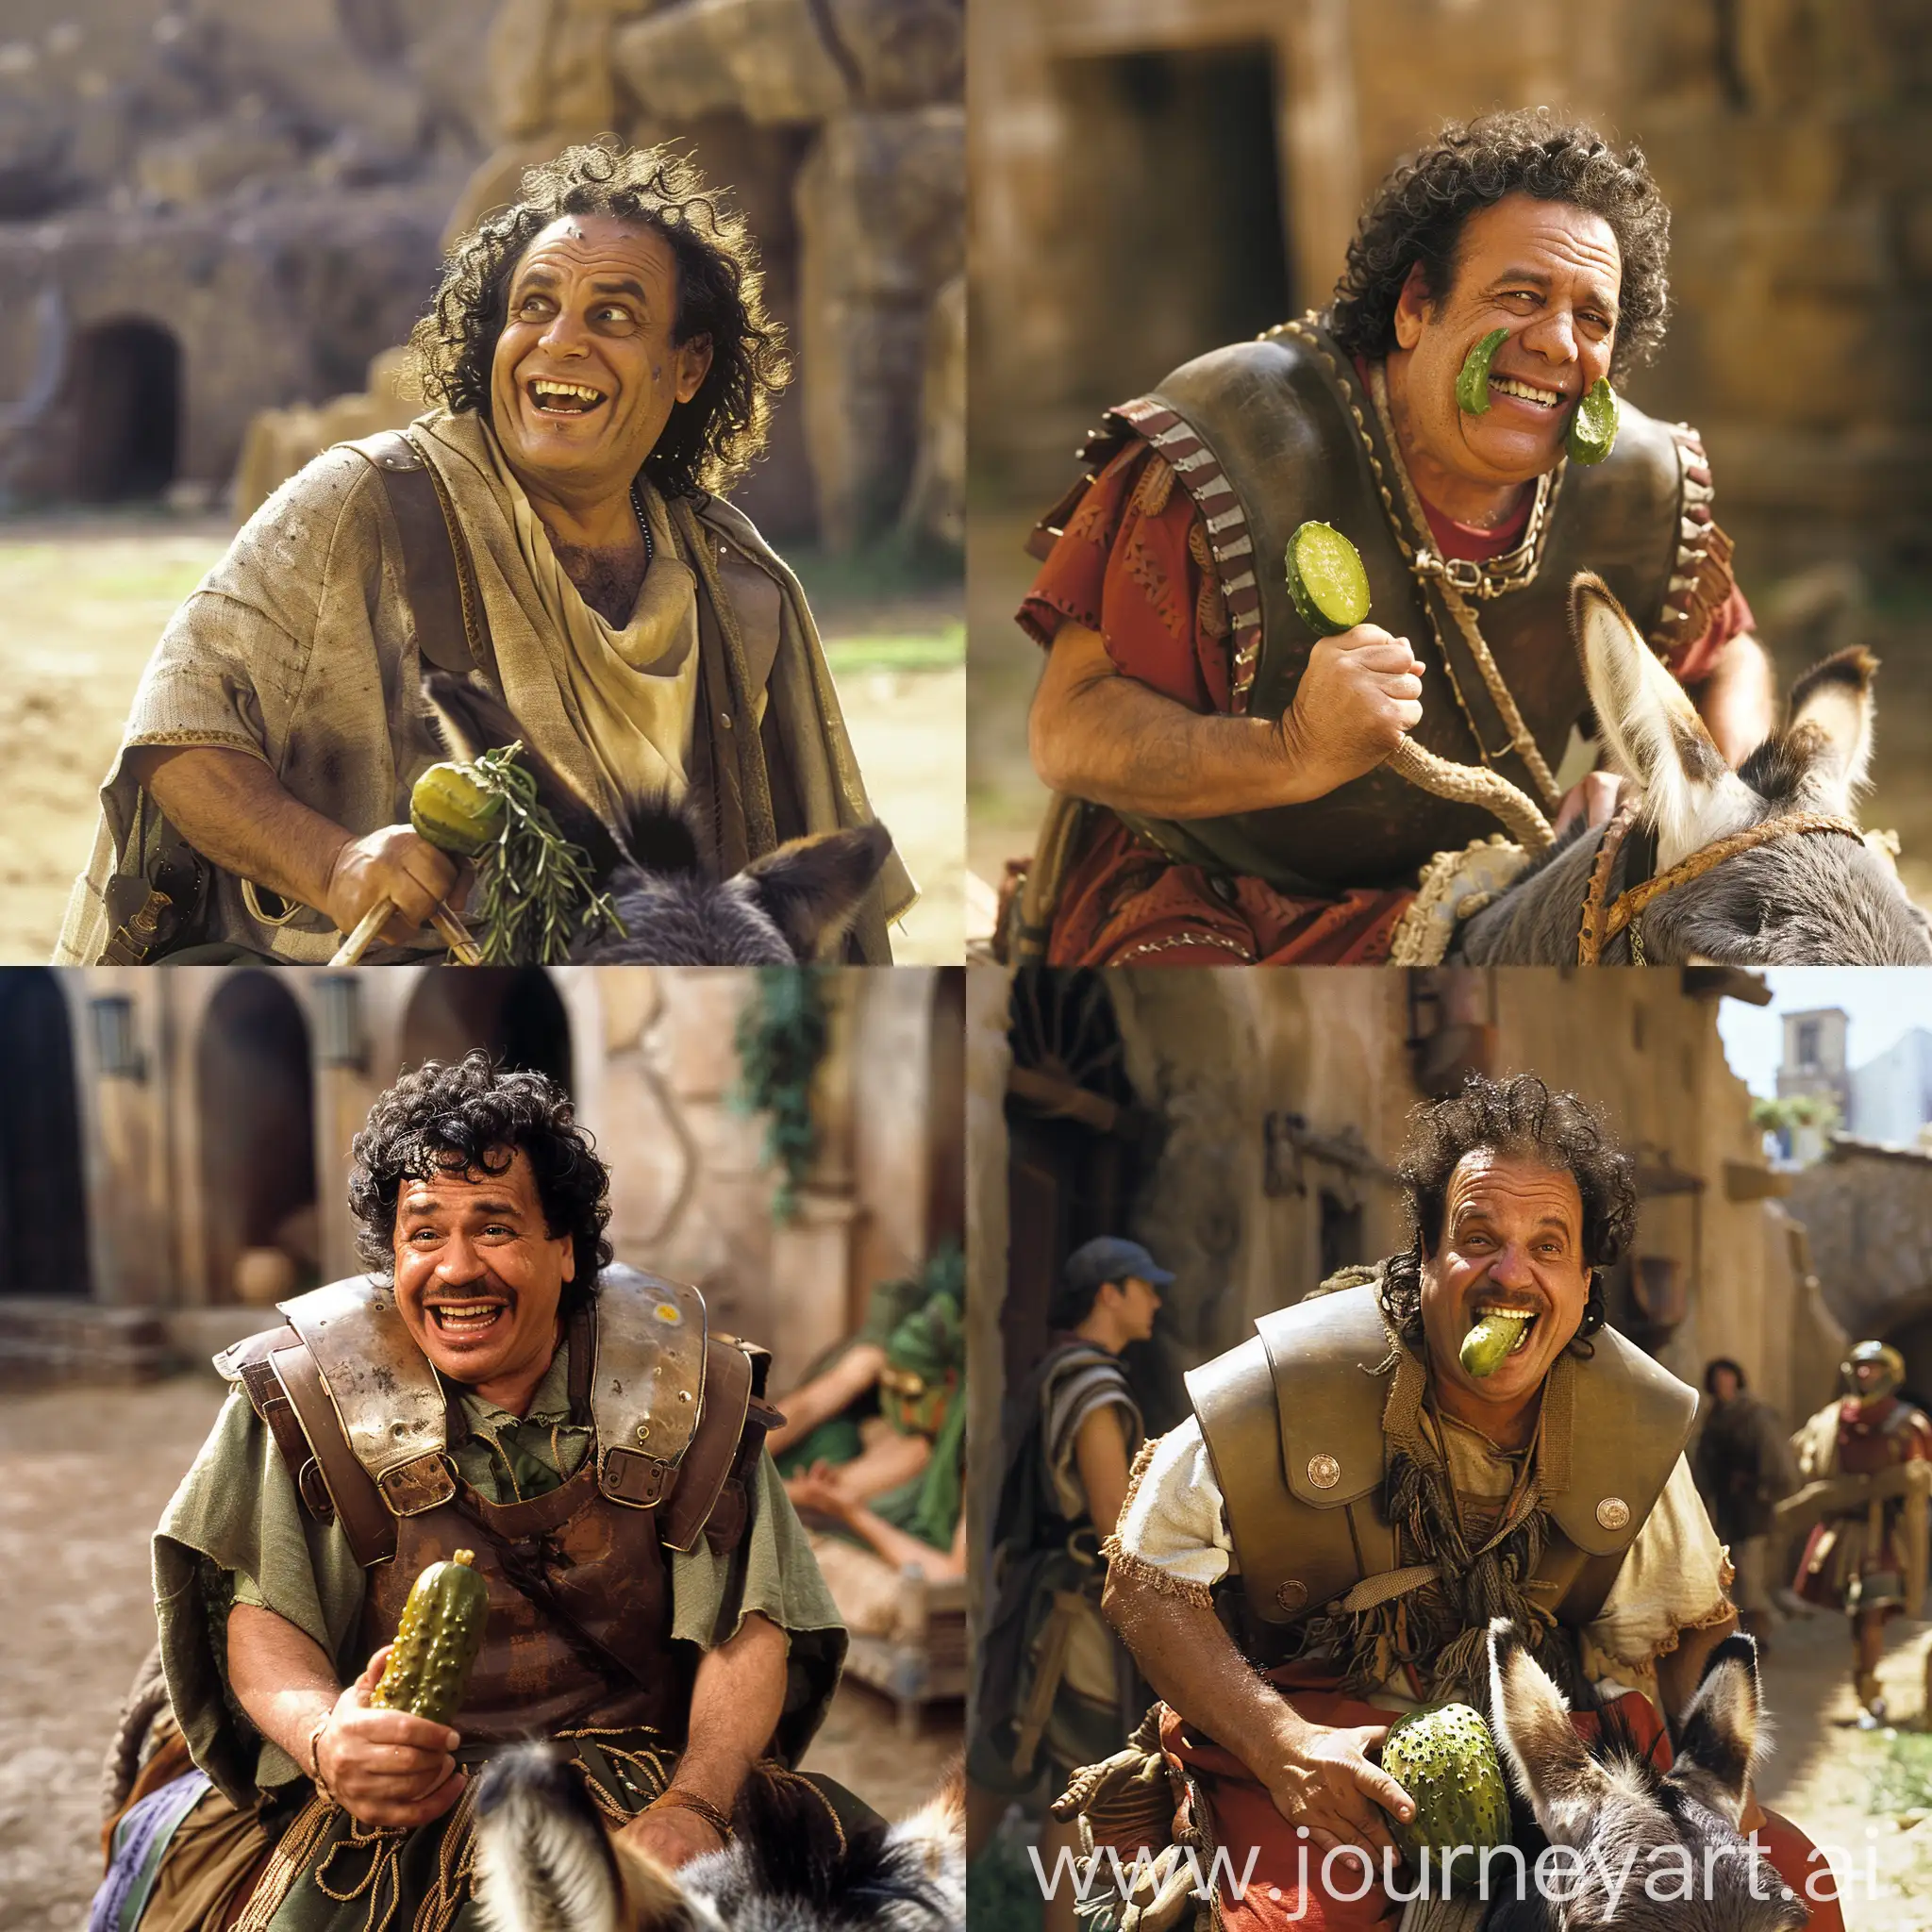 Danny devito smiling with a half eaten pickle and pickle juice coming out of his mouth while sitting on a donkey as an ancient roman in ancient roman times